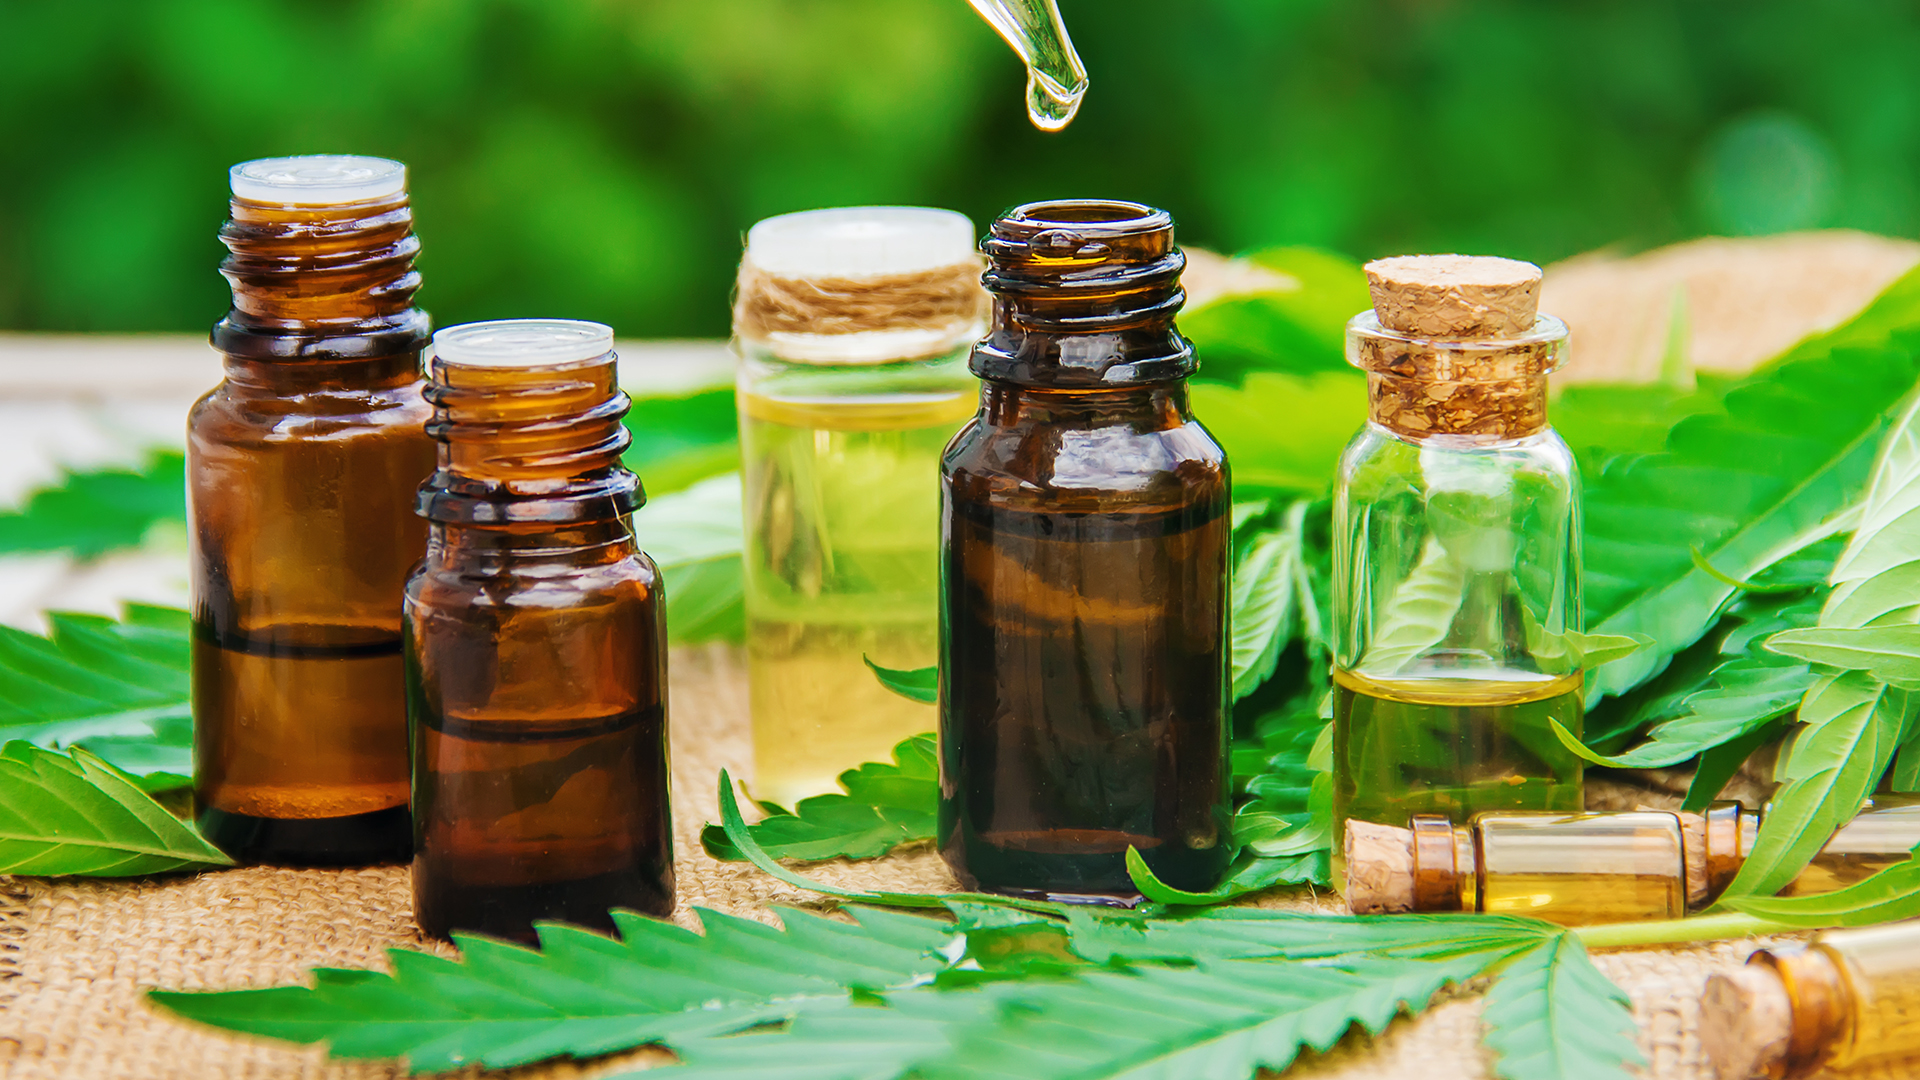 Is It Legal To Buy CBD Oil And CBD Flower?